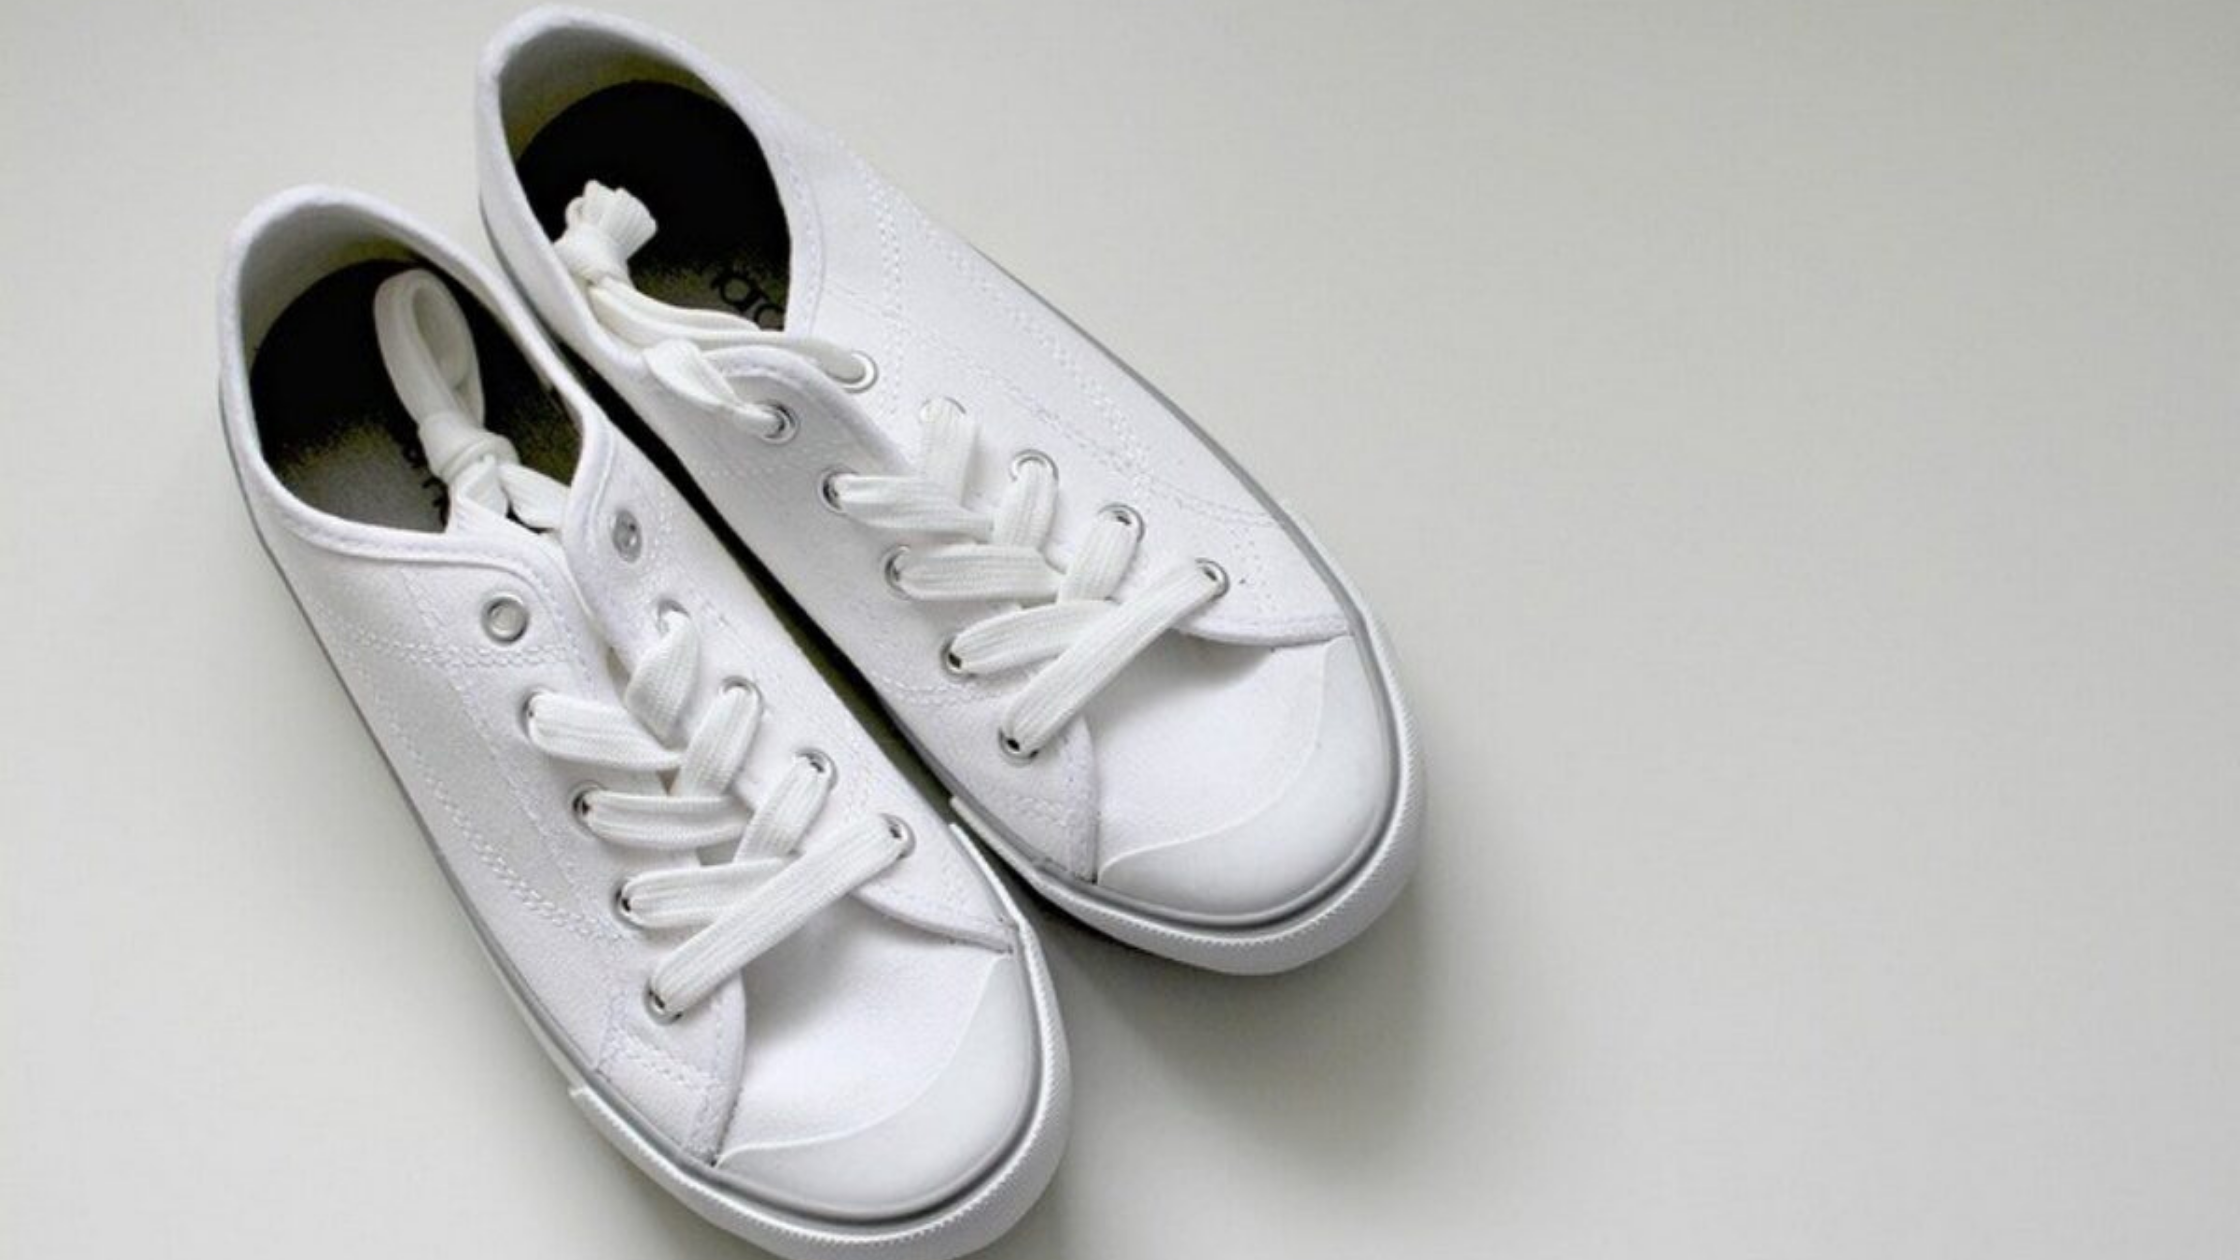 Why should you clean your shoes regularly?